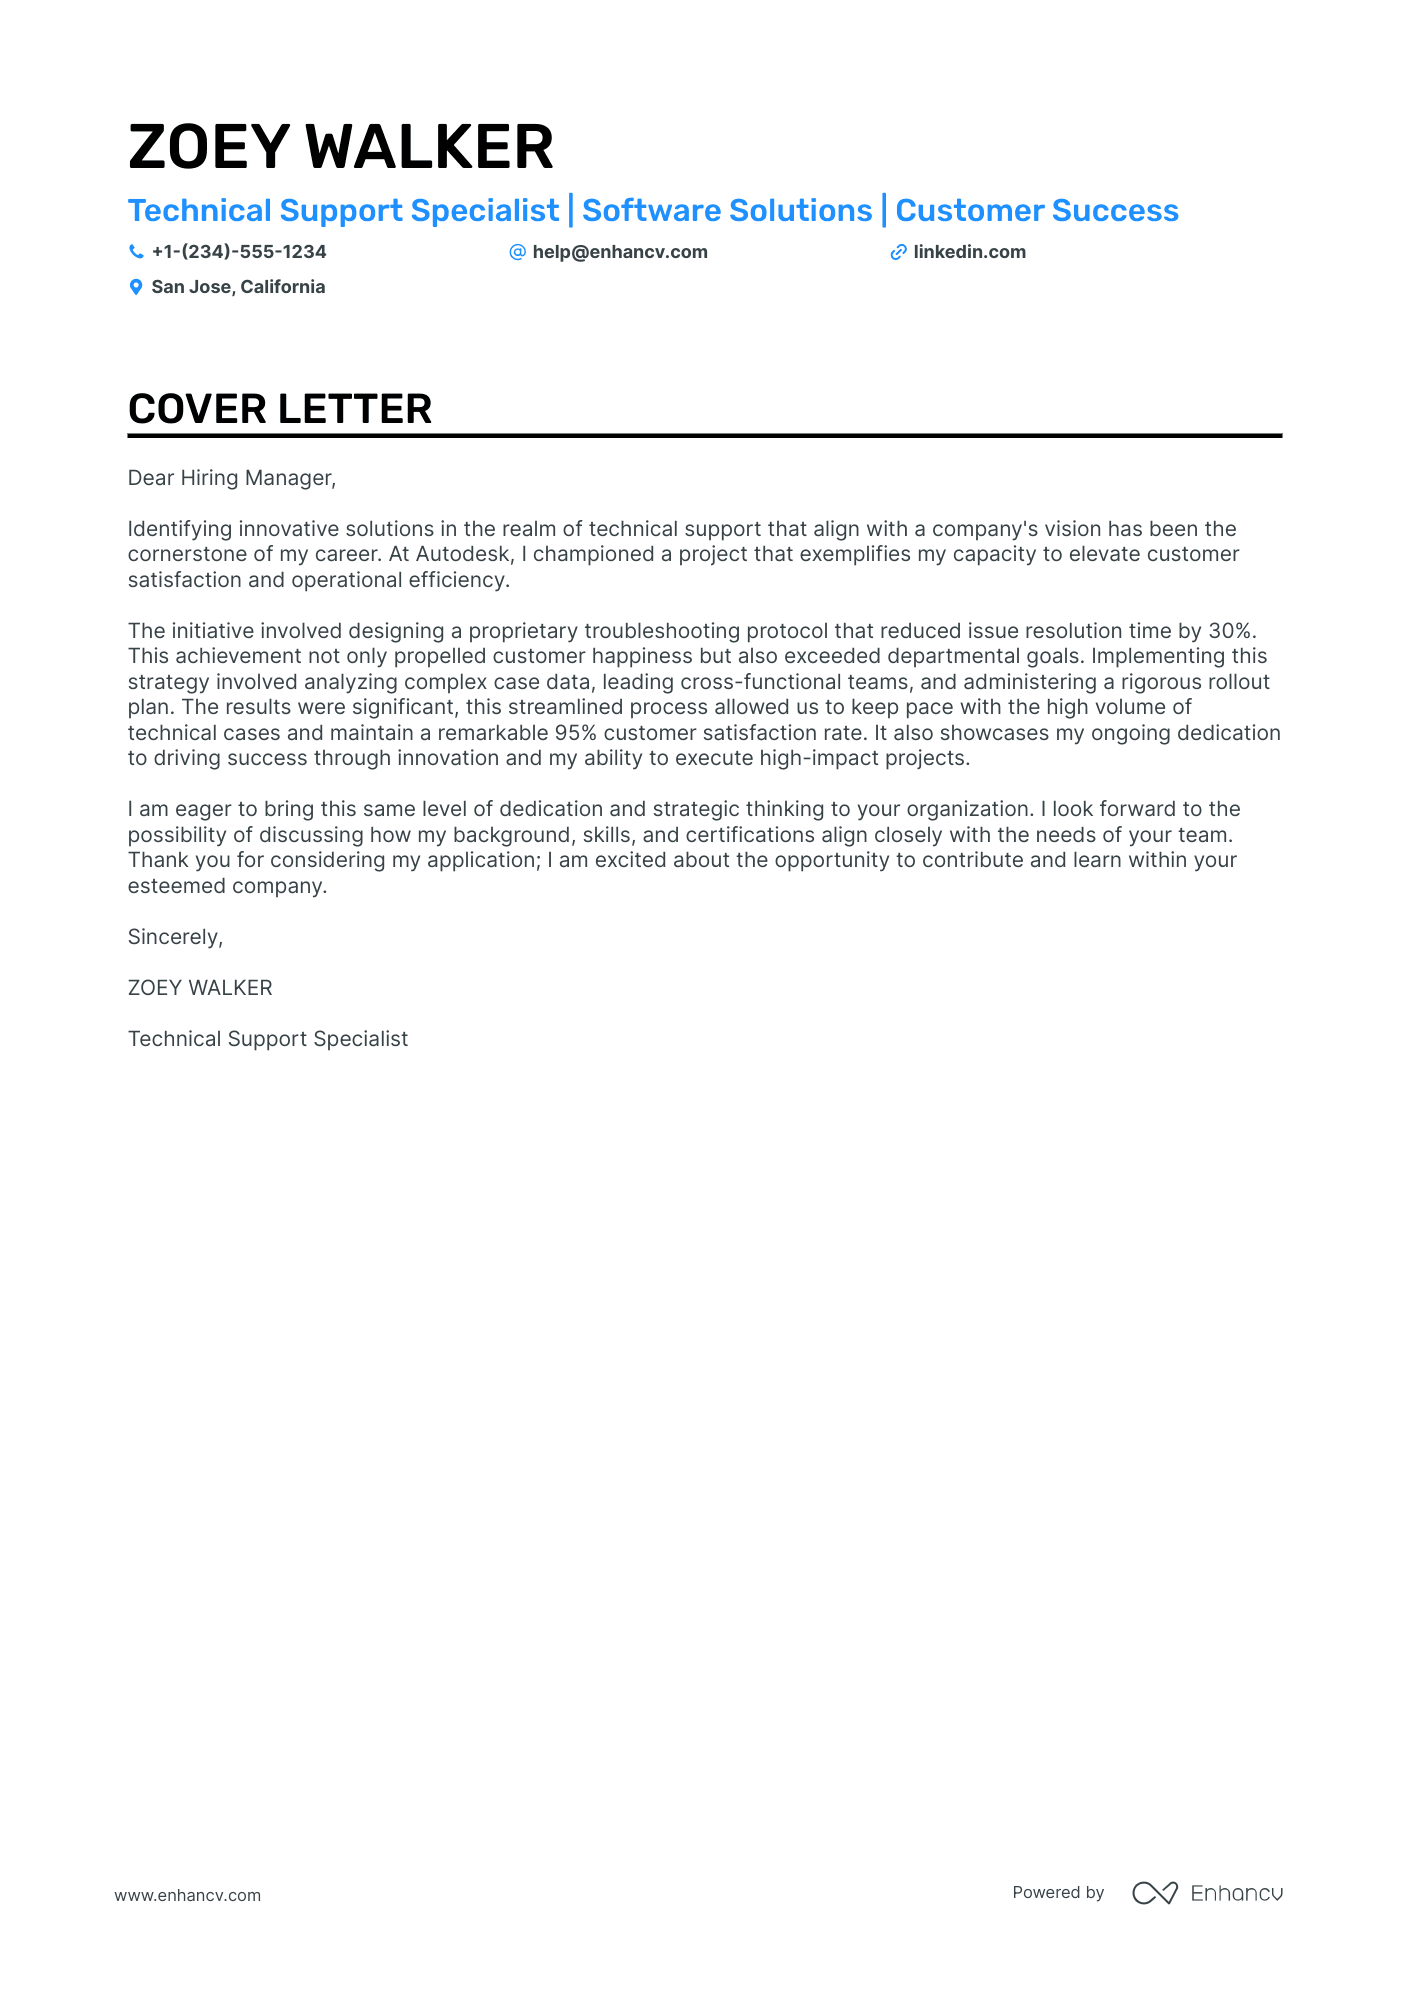 Technical Support Manager cover letter